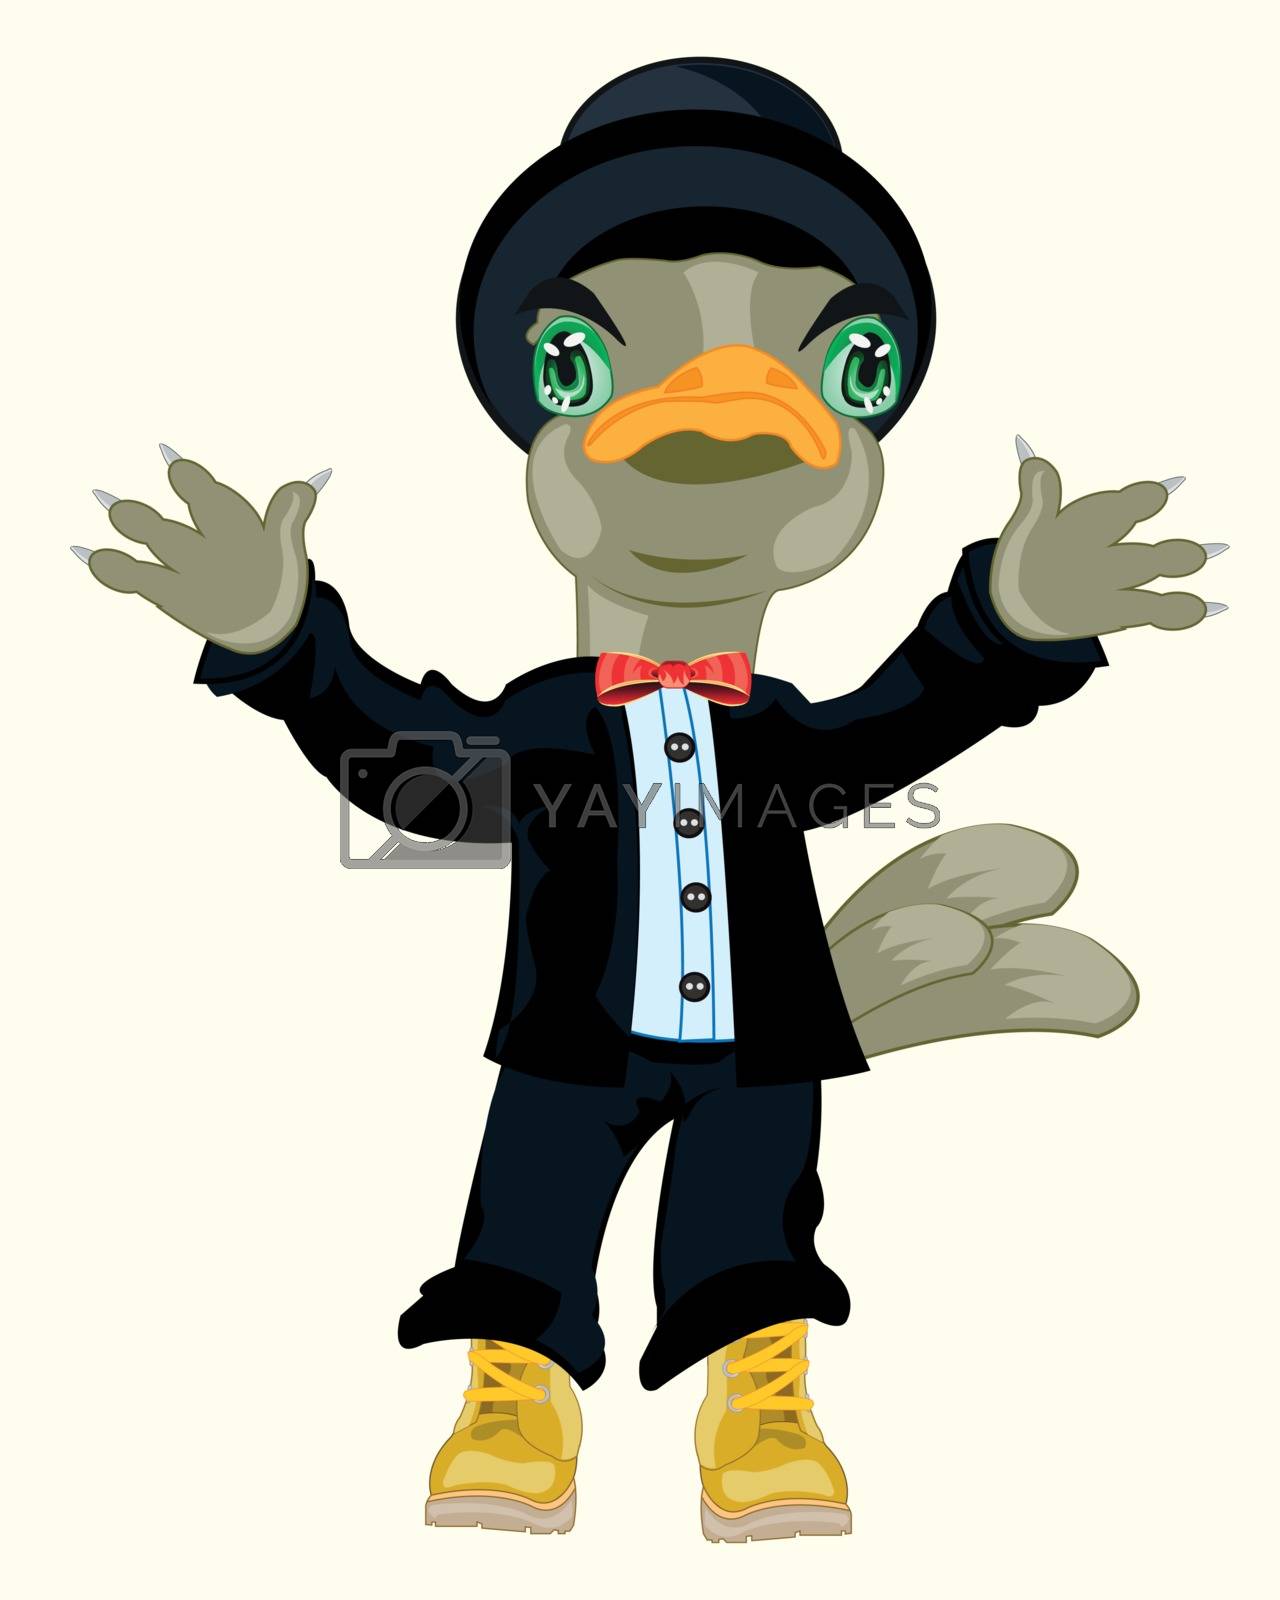 Royalty free image of Bird in suit by cobol1964